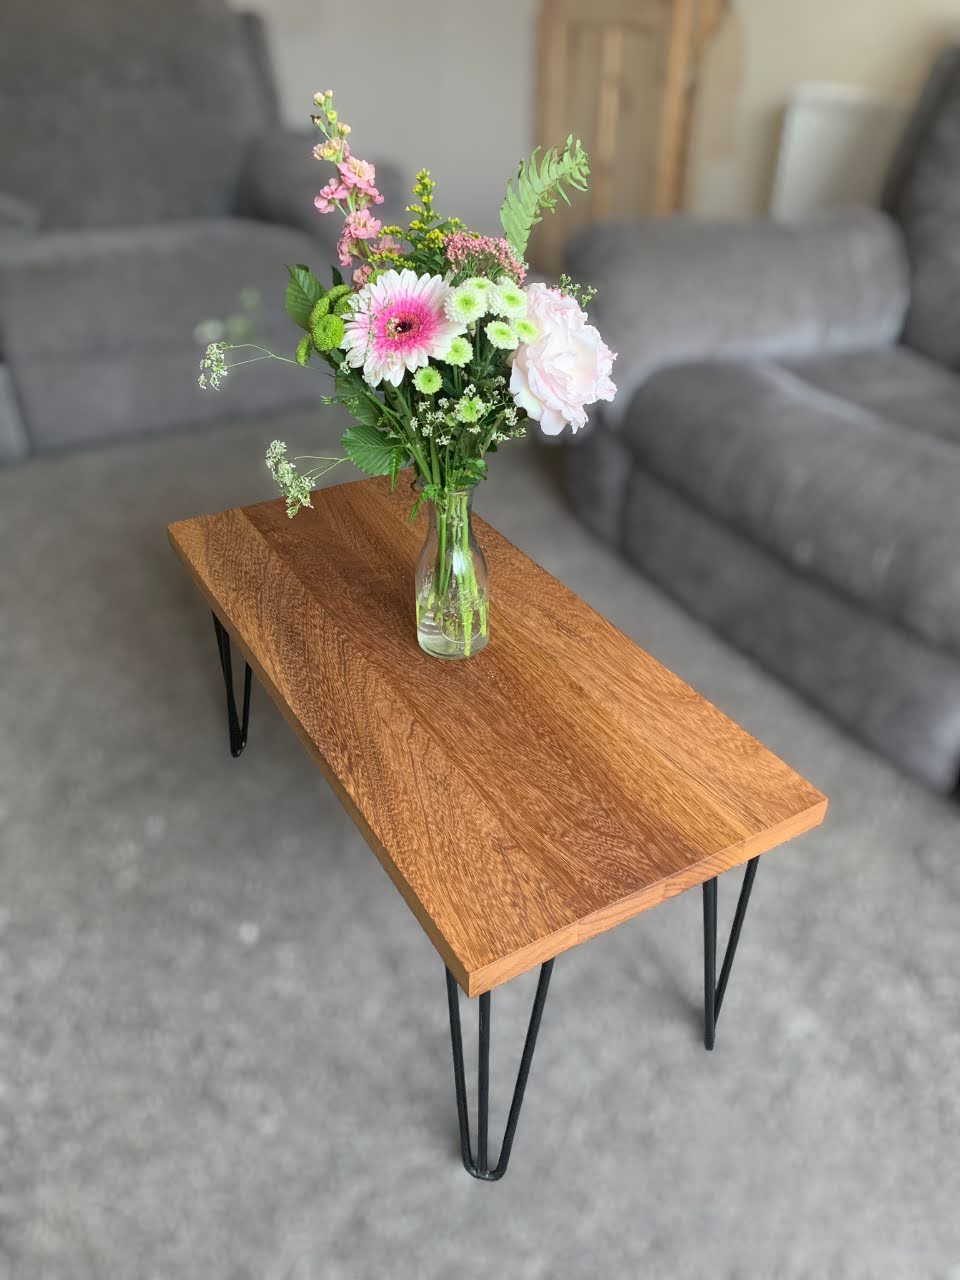 Hardwood Iroko/Sapele Coffee Tables with Hairpin Legs | Made to Order